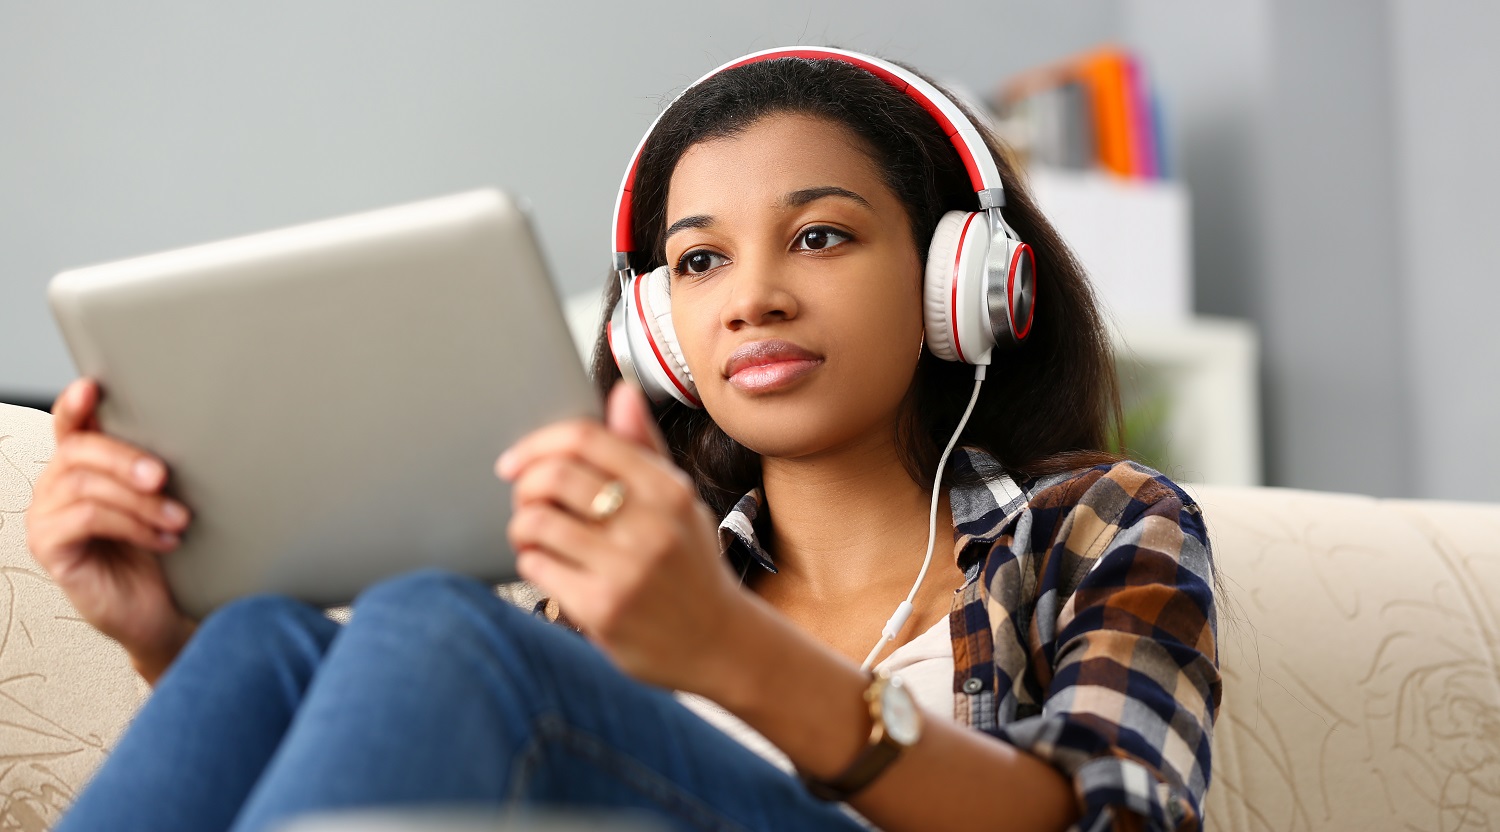 a woman holding a tablet while wearing headphones